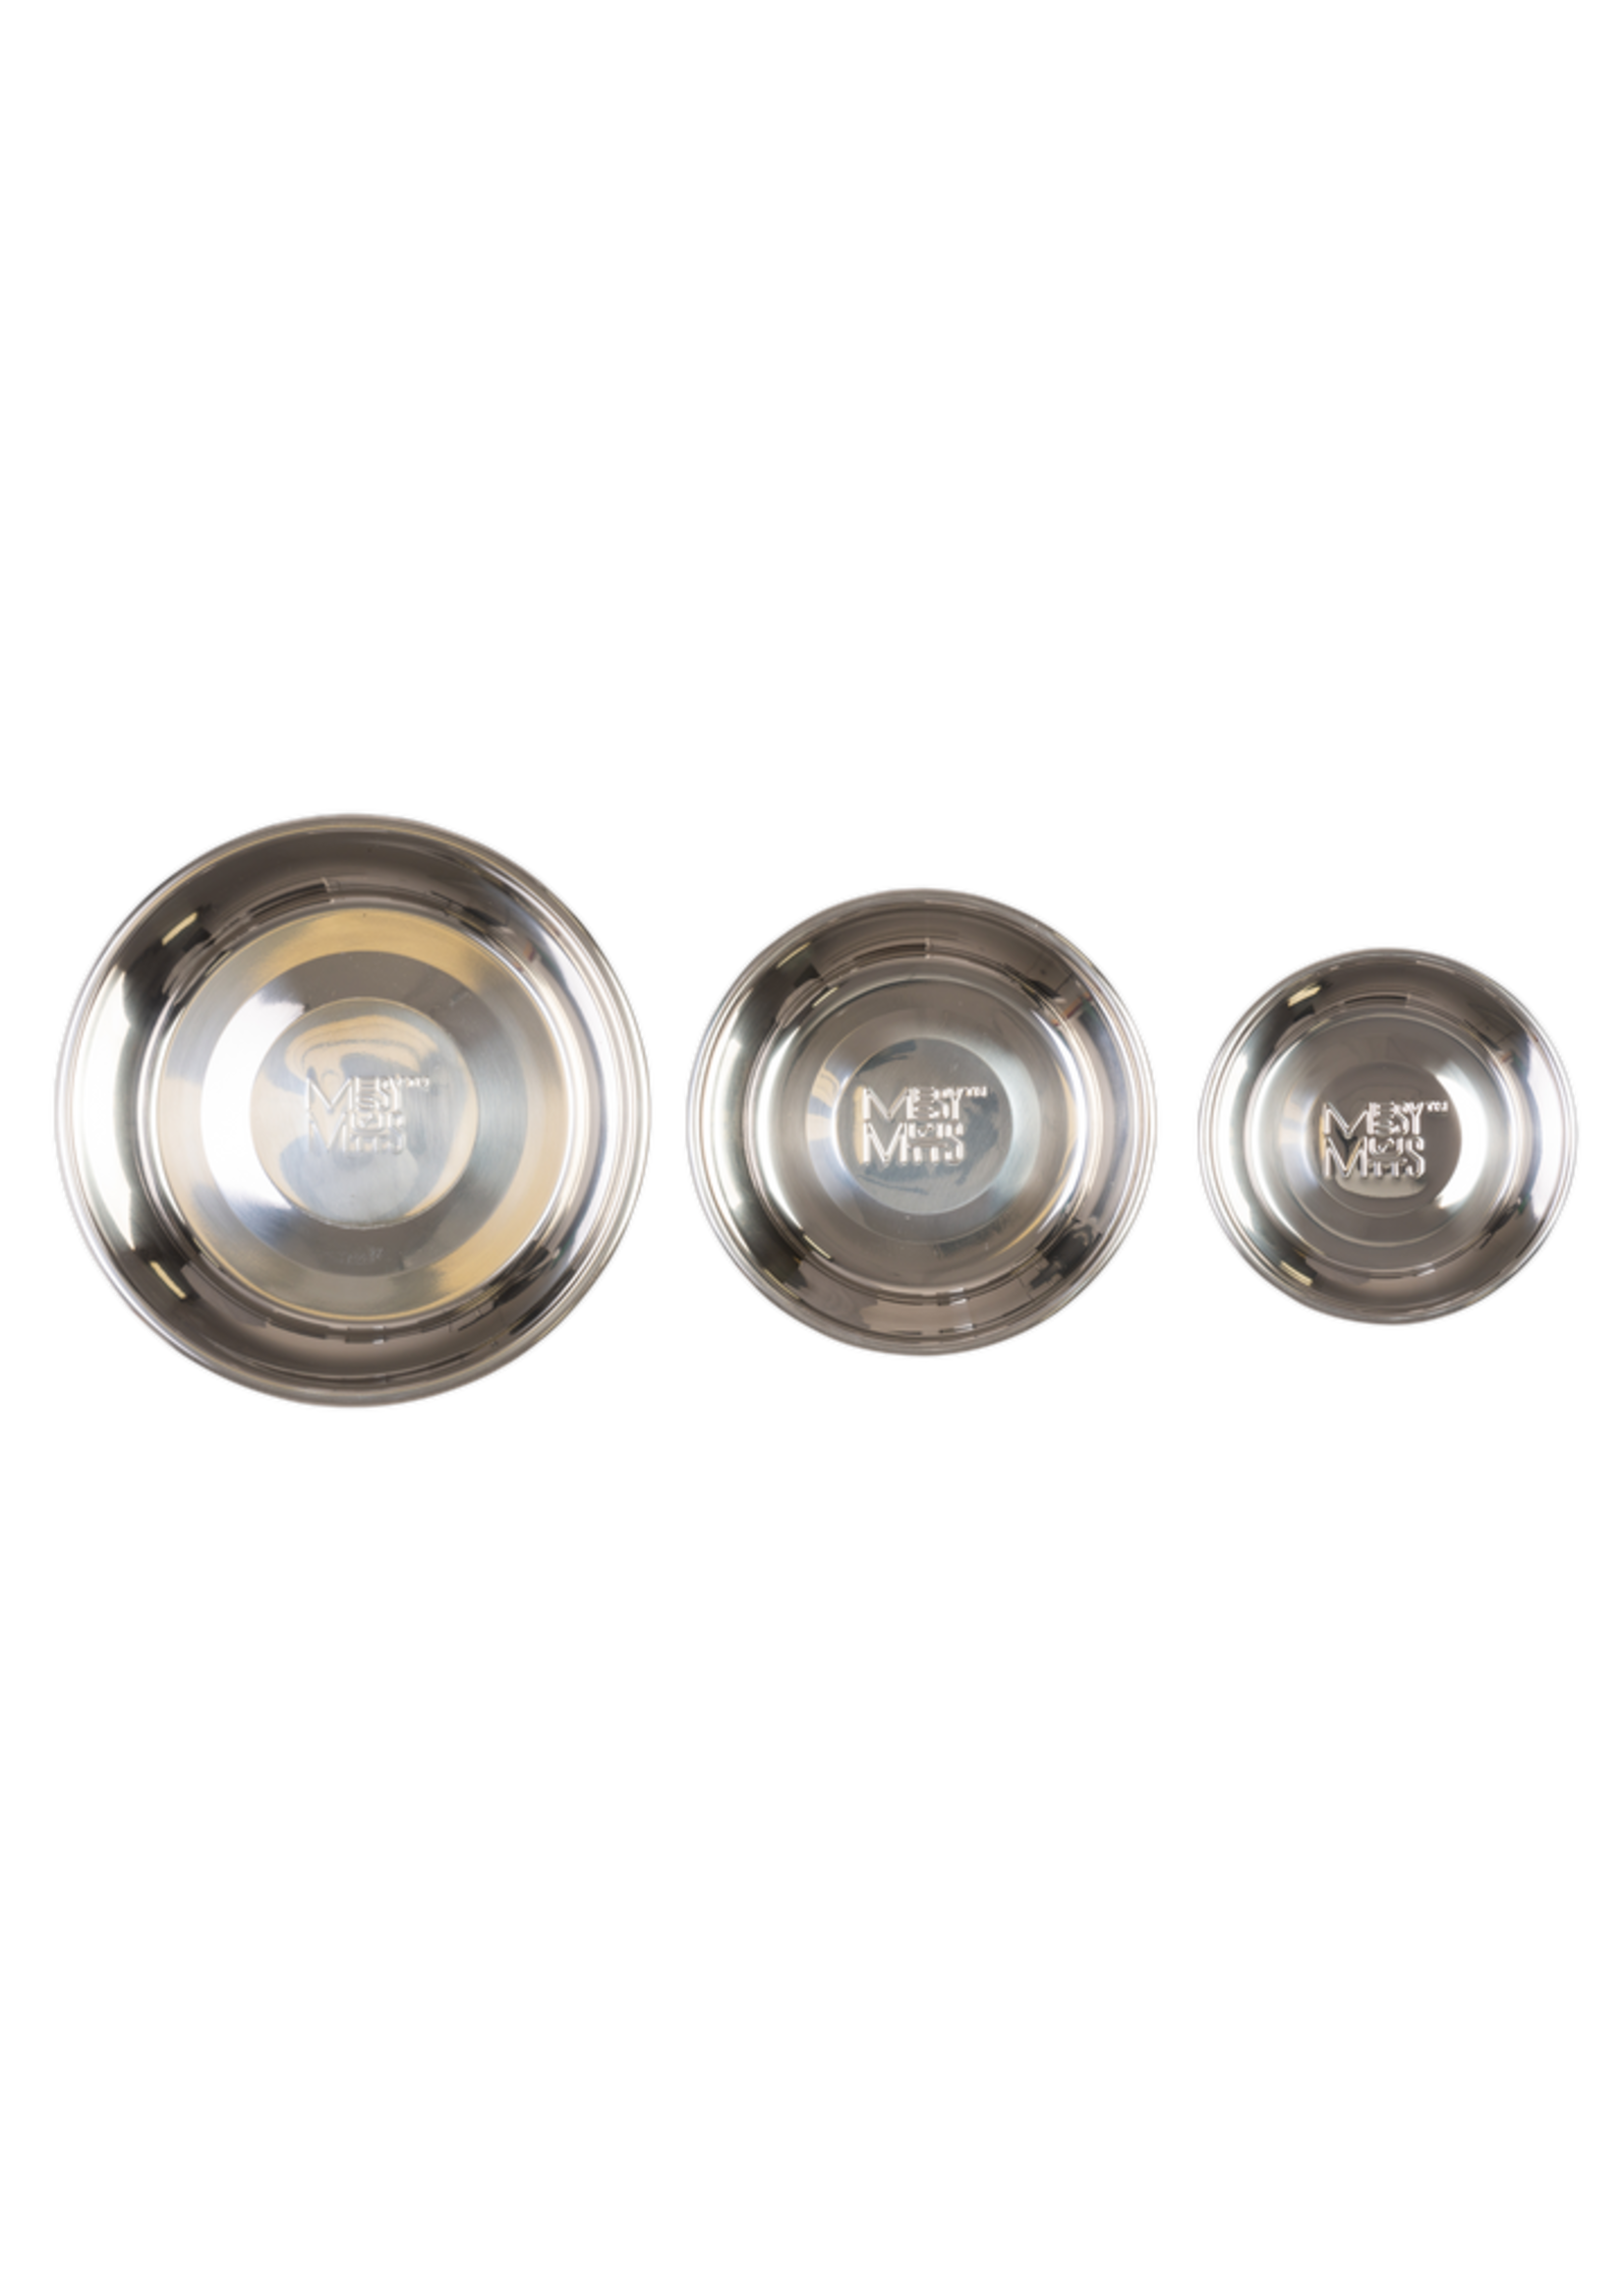 Messy Mutts Messy Mutts Stainless Steel Bowl